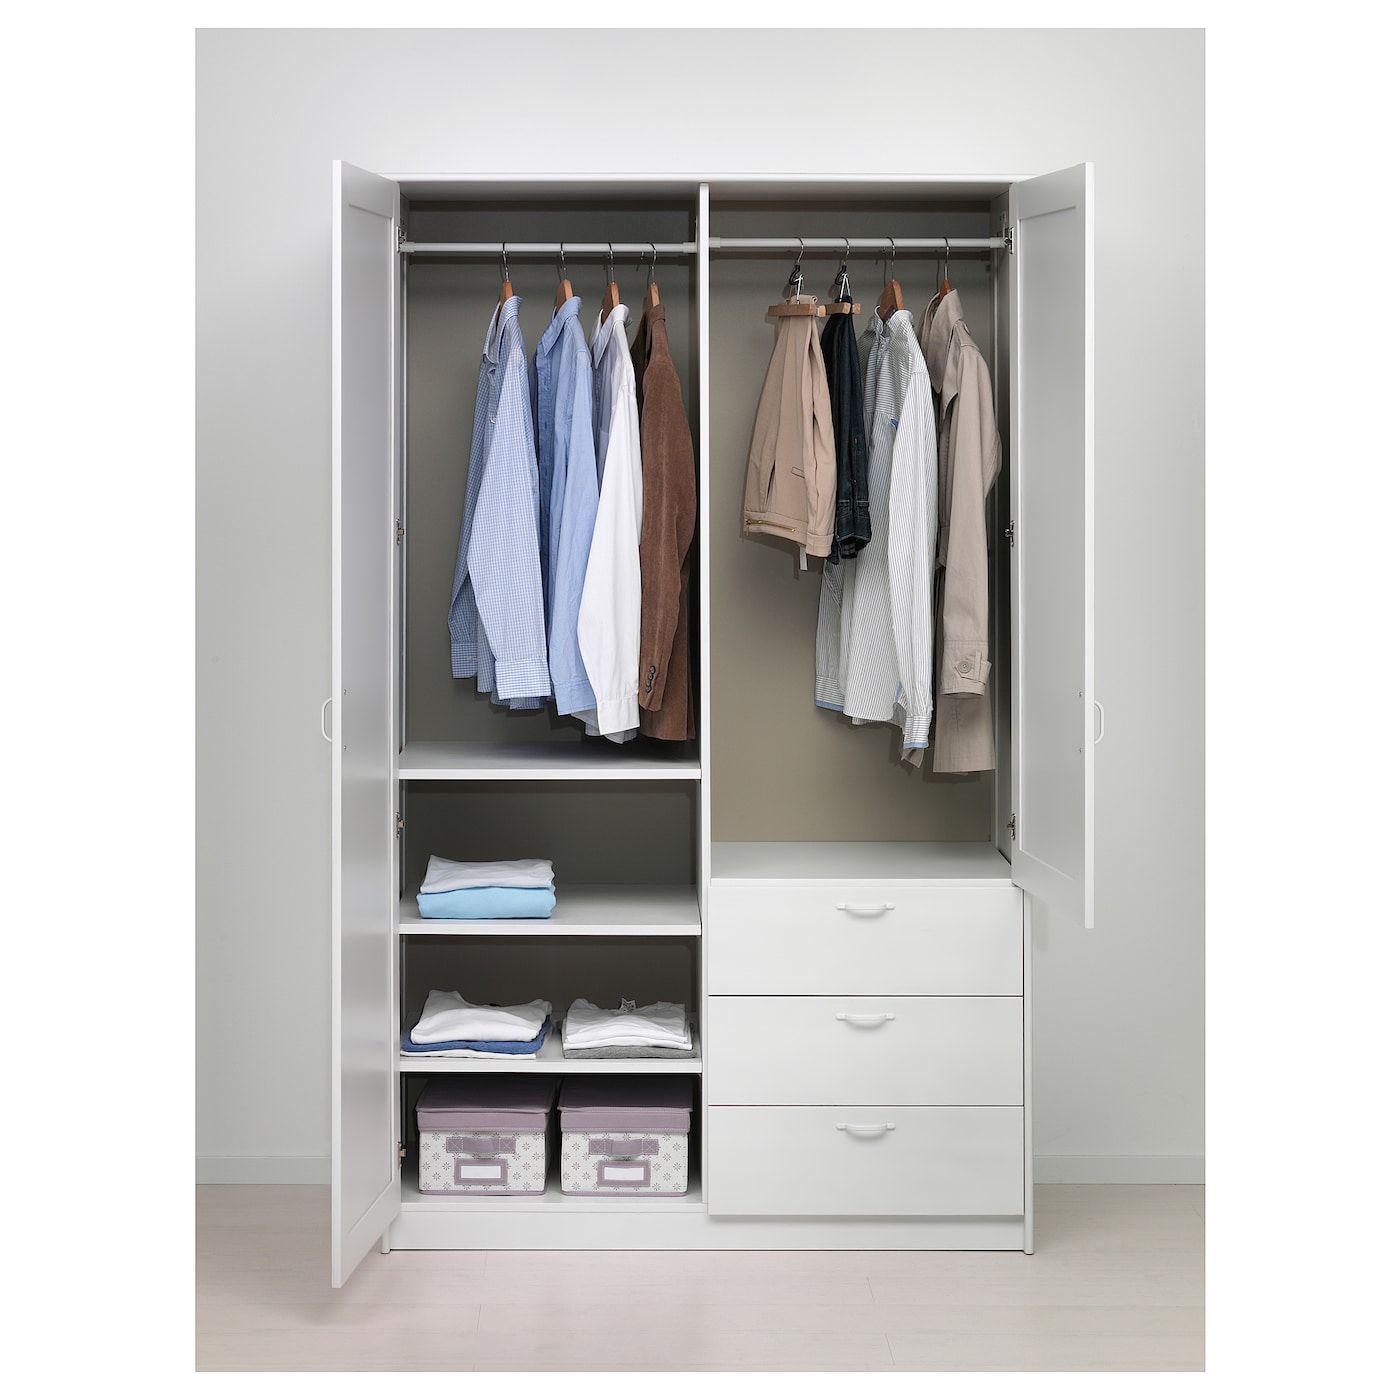 Musken Wardrobe With 2 Doors+3 Drawers, White, 124x60x201 Cm – Ikea Inside Wardrobes With 3 Drawers (View 6 of 15)